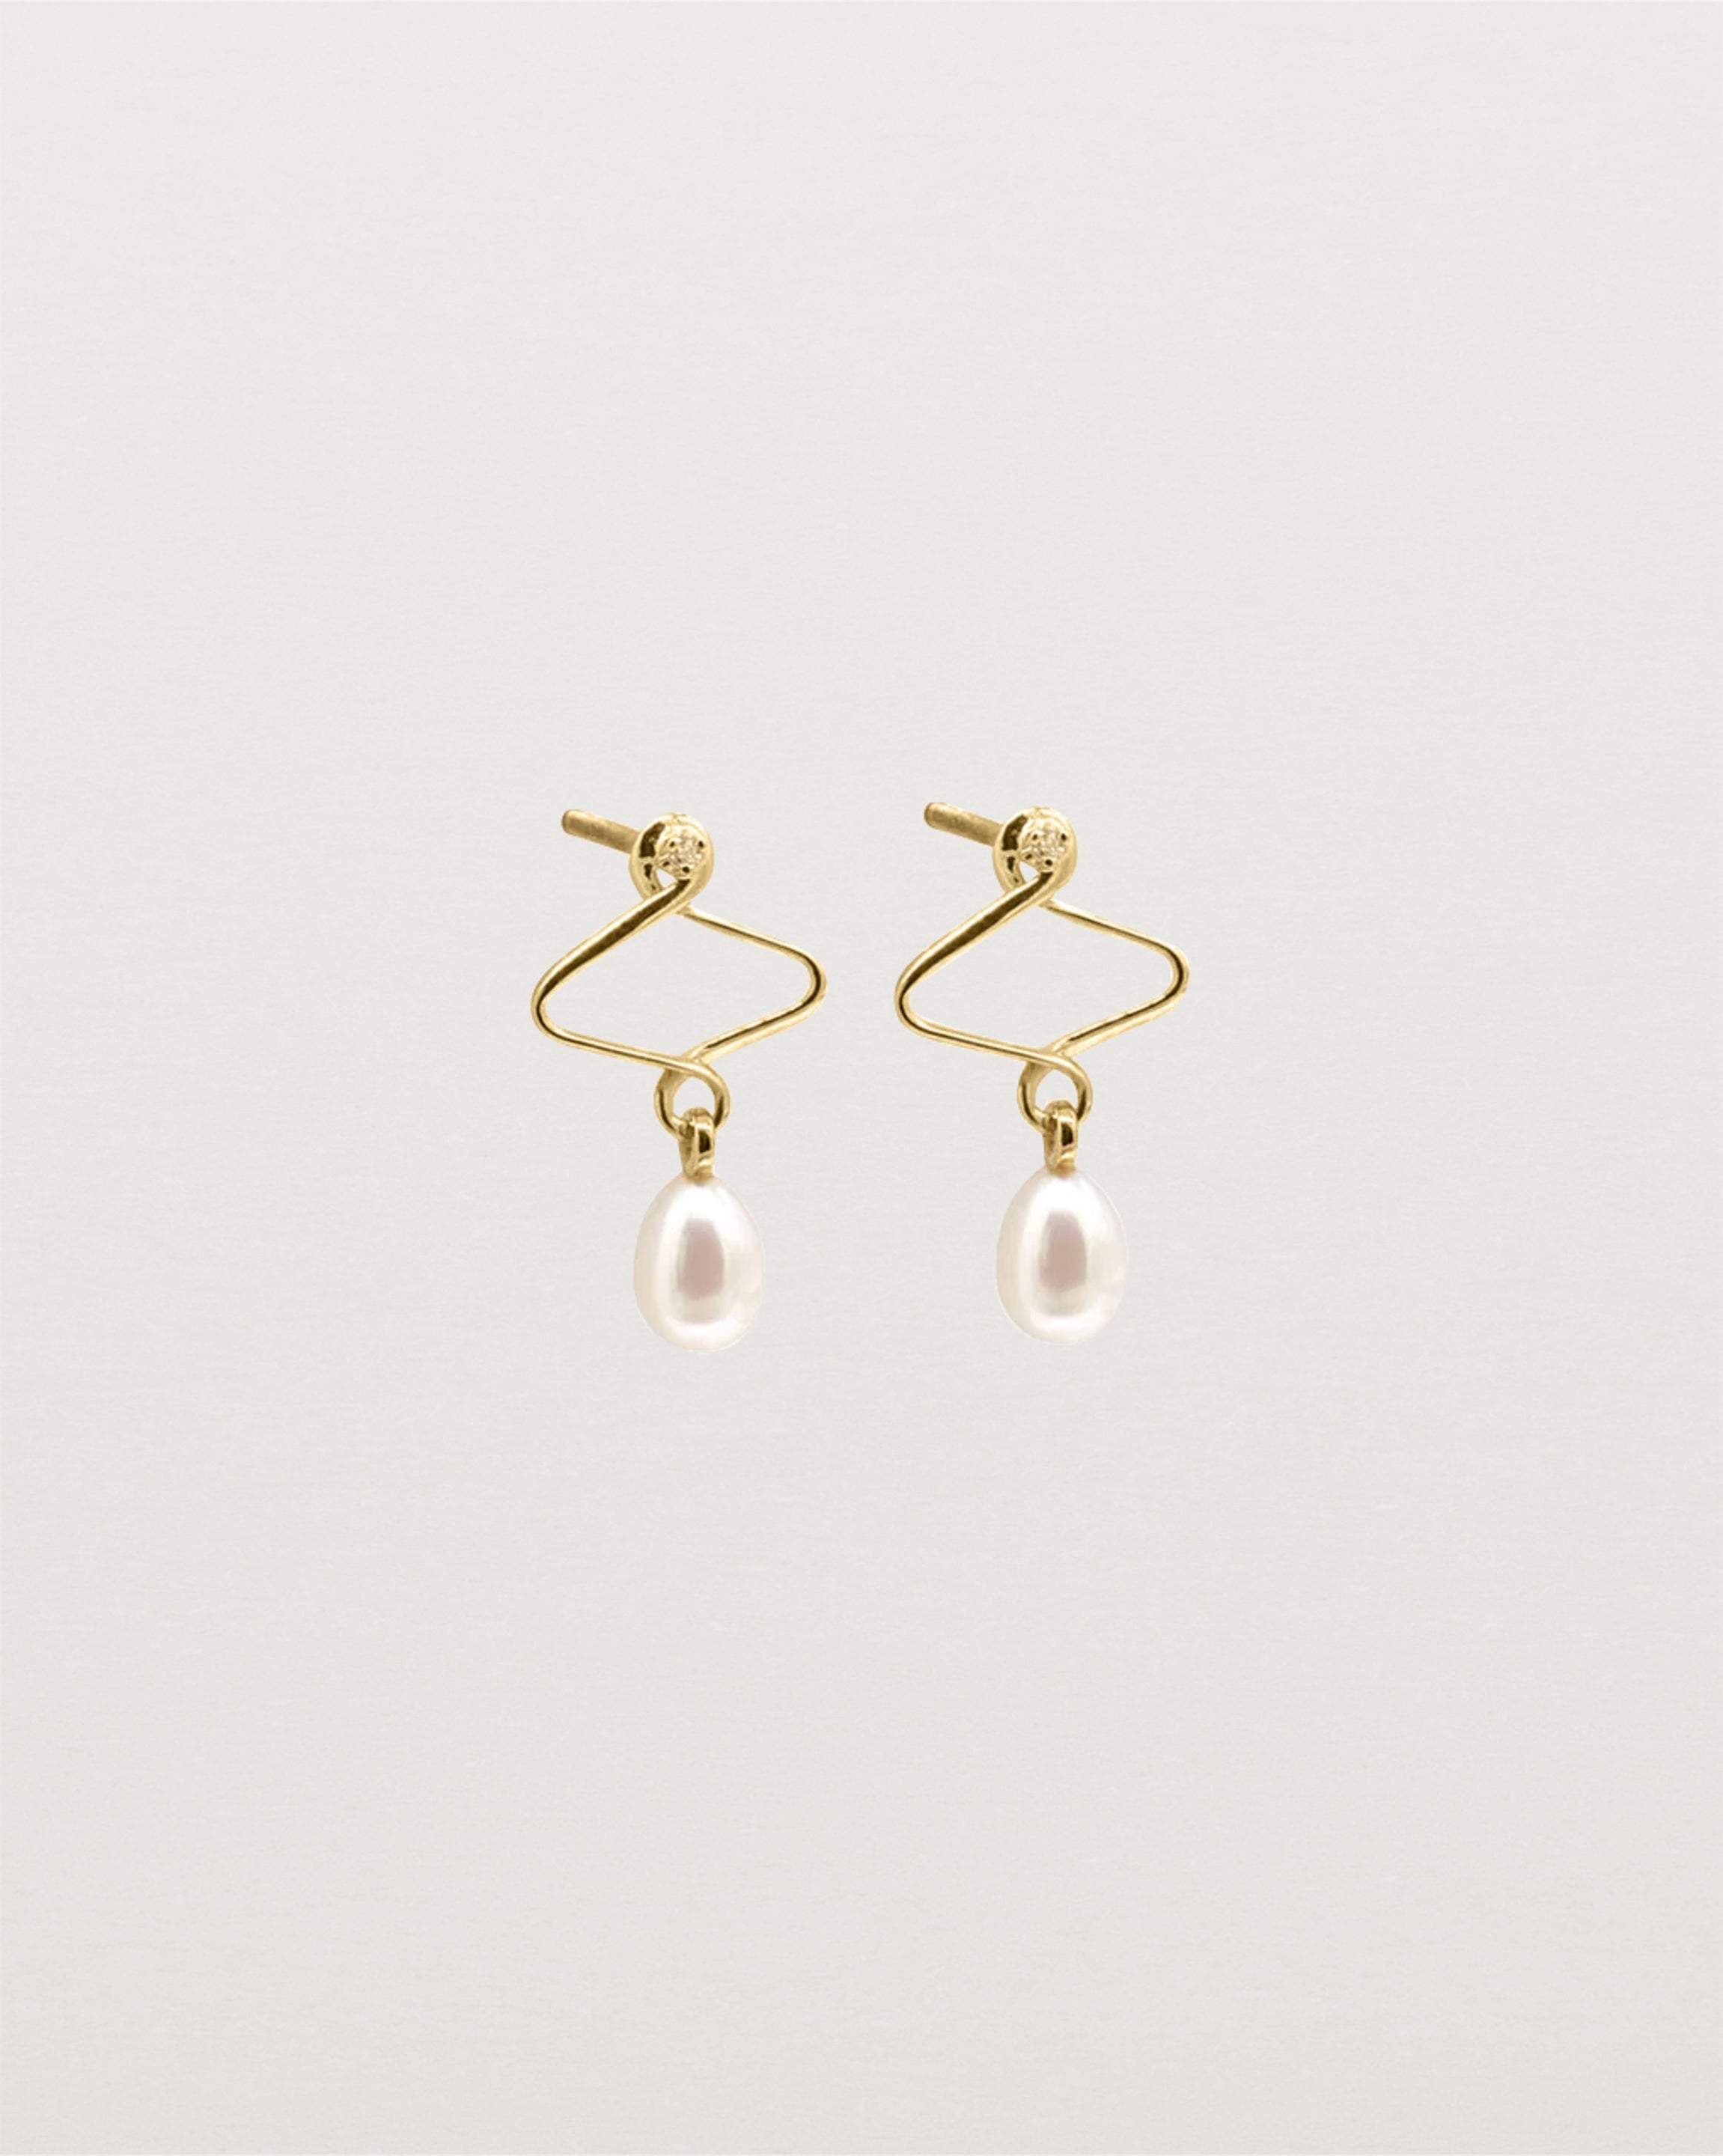 Pearl drop earrings with vintage detailing, crafted in yellow gold